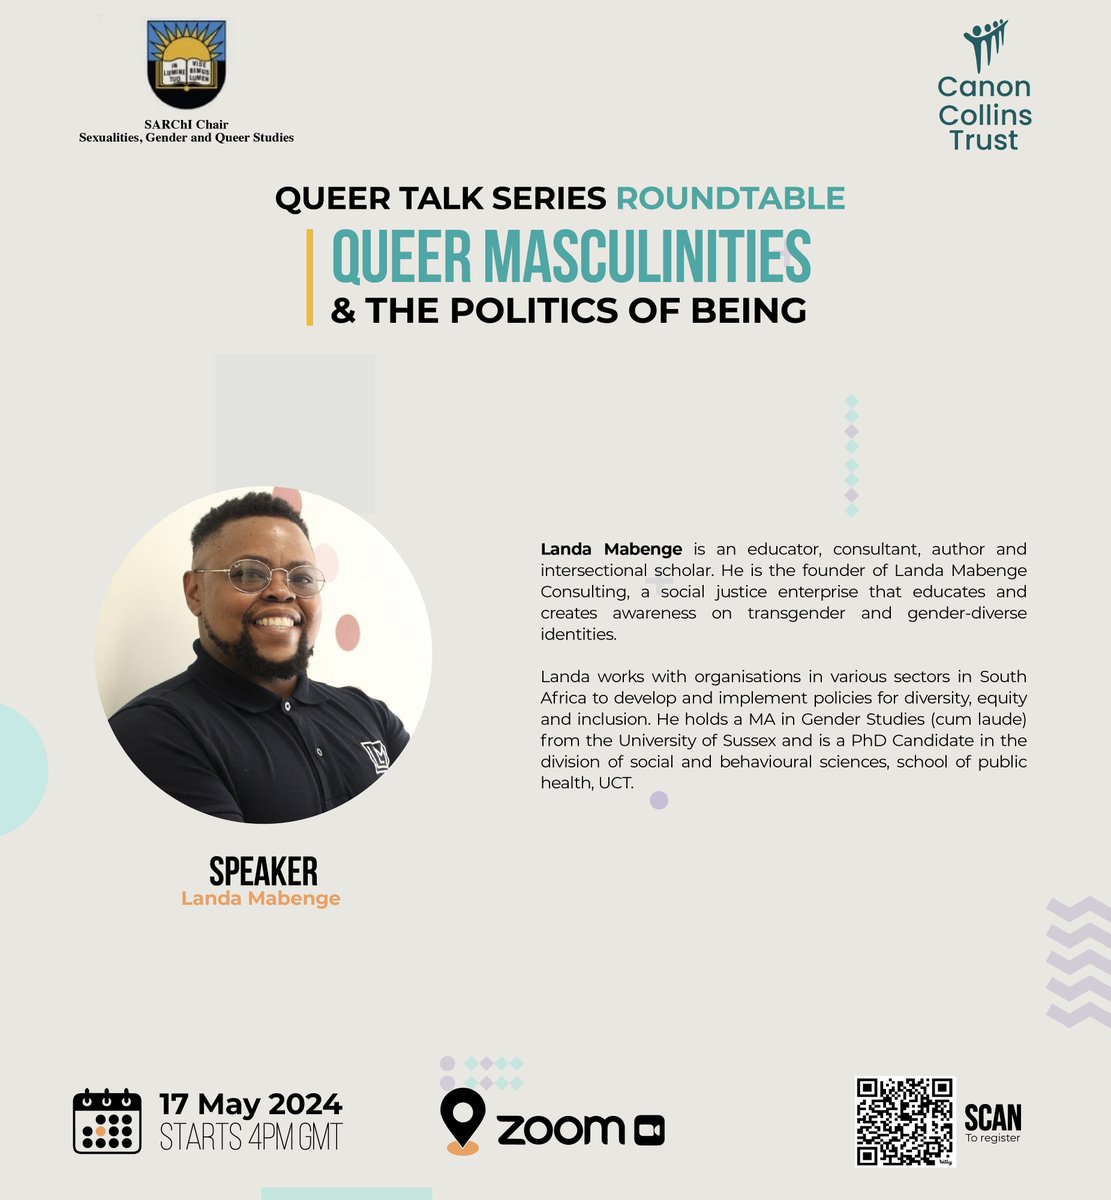 Meet Landa Mabenge, a 2024 Canon Collins Scholars' Scholar, educator, consultant, author and intersectional scholar. He will be a speaker at the 'Queer Masculinities and The Politics of Being' event happening on May 17th!